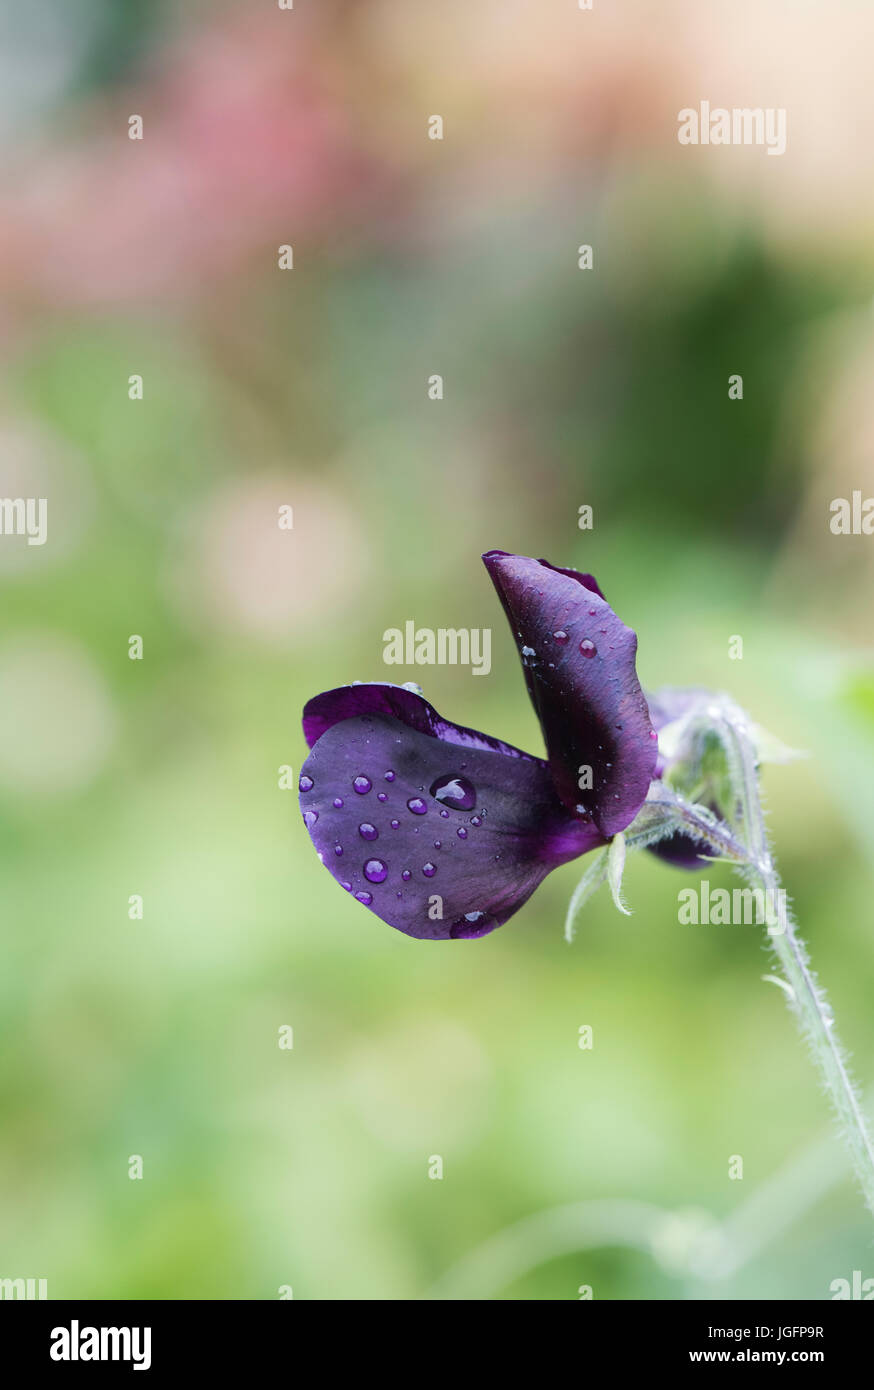 Lathyrus odoratus. Sweet pea 'Almost black' flower covered in rain drops in an english garden Stock Photo